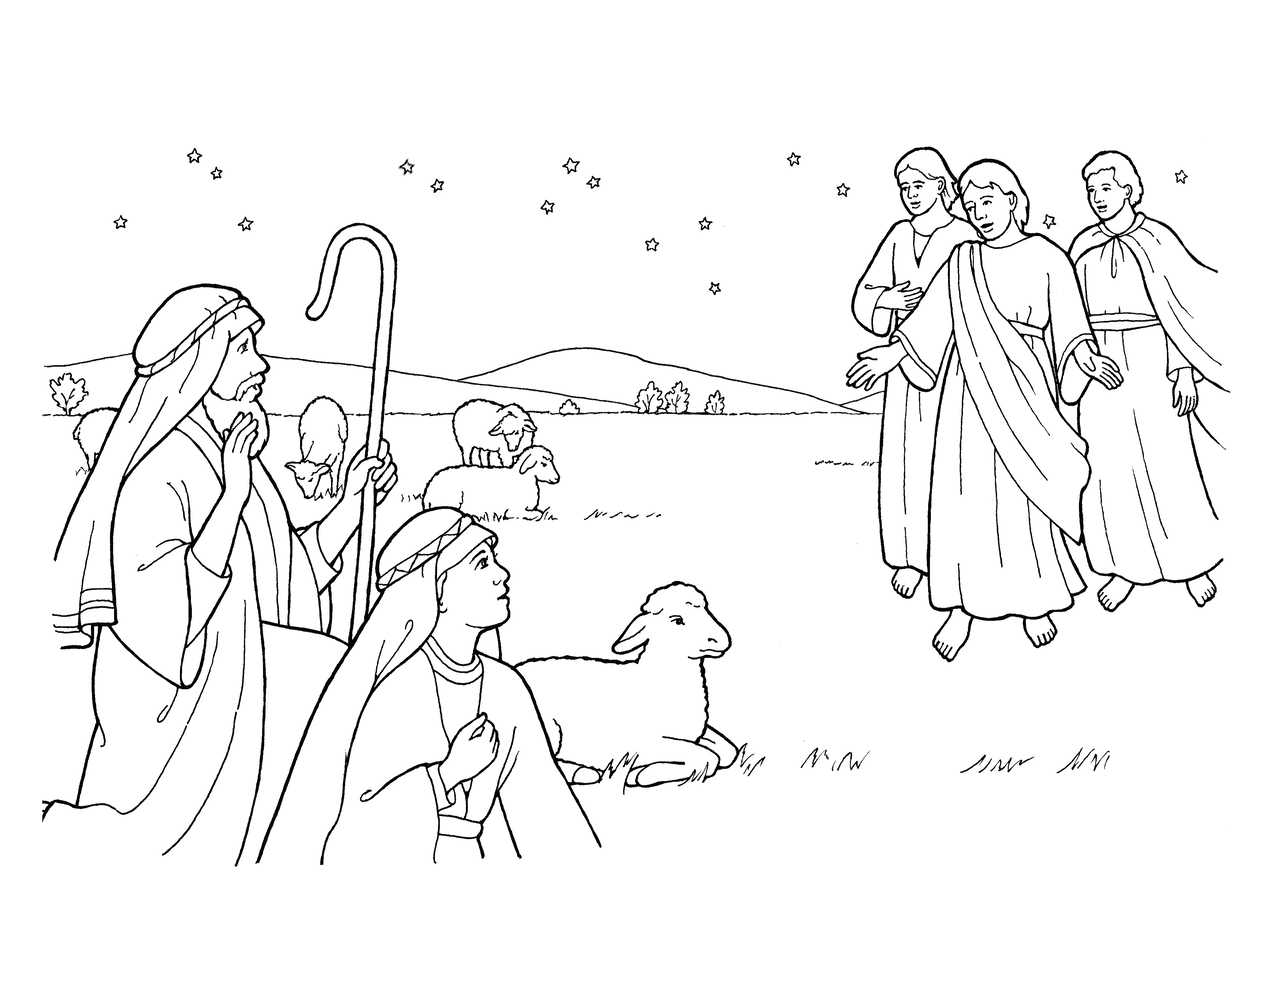 Nativity: Angels Appear to Shepherds